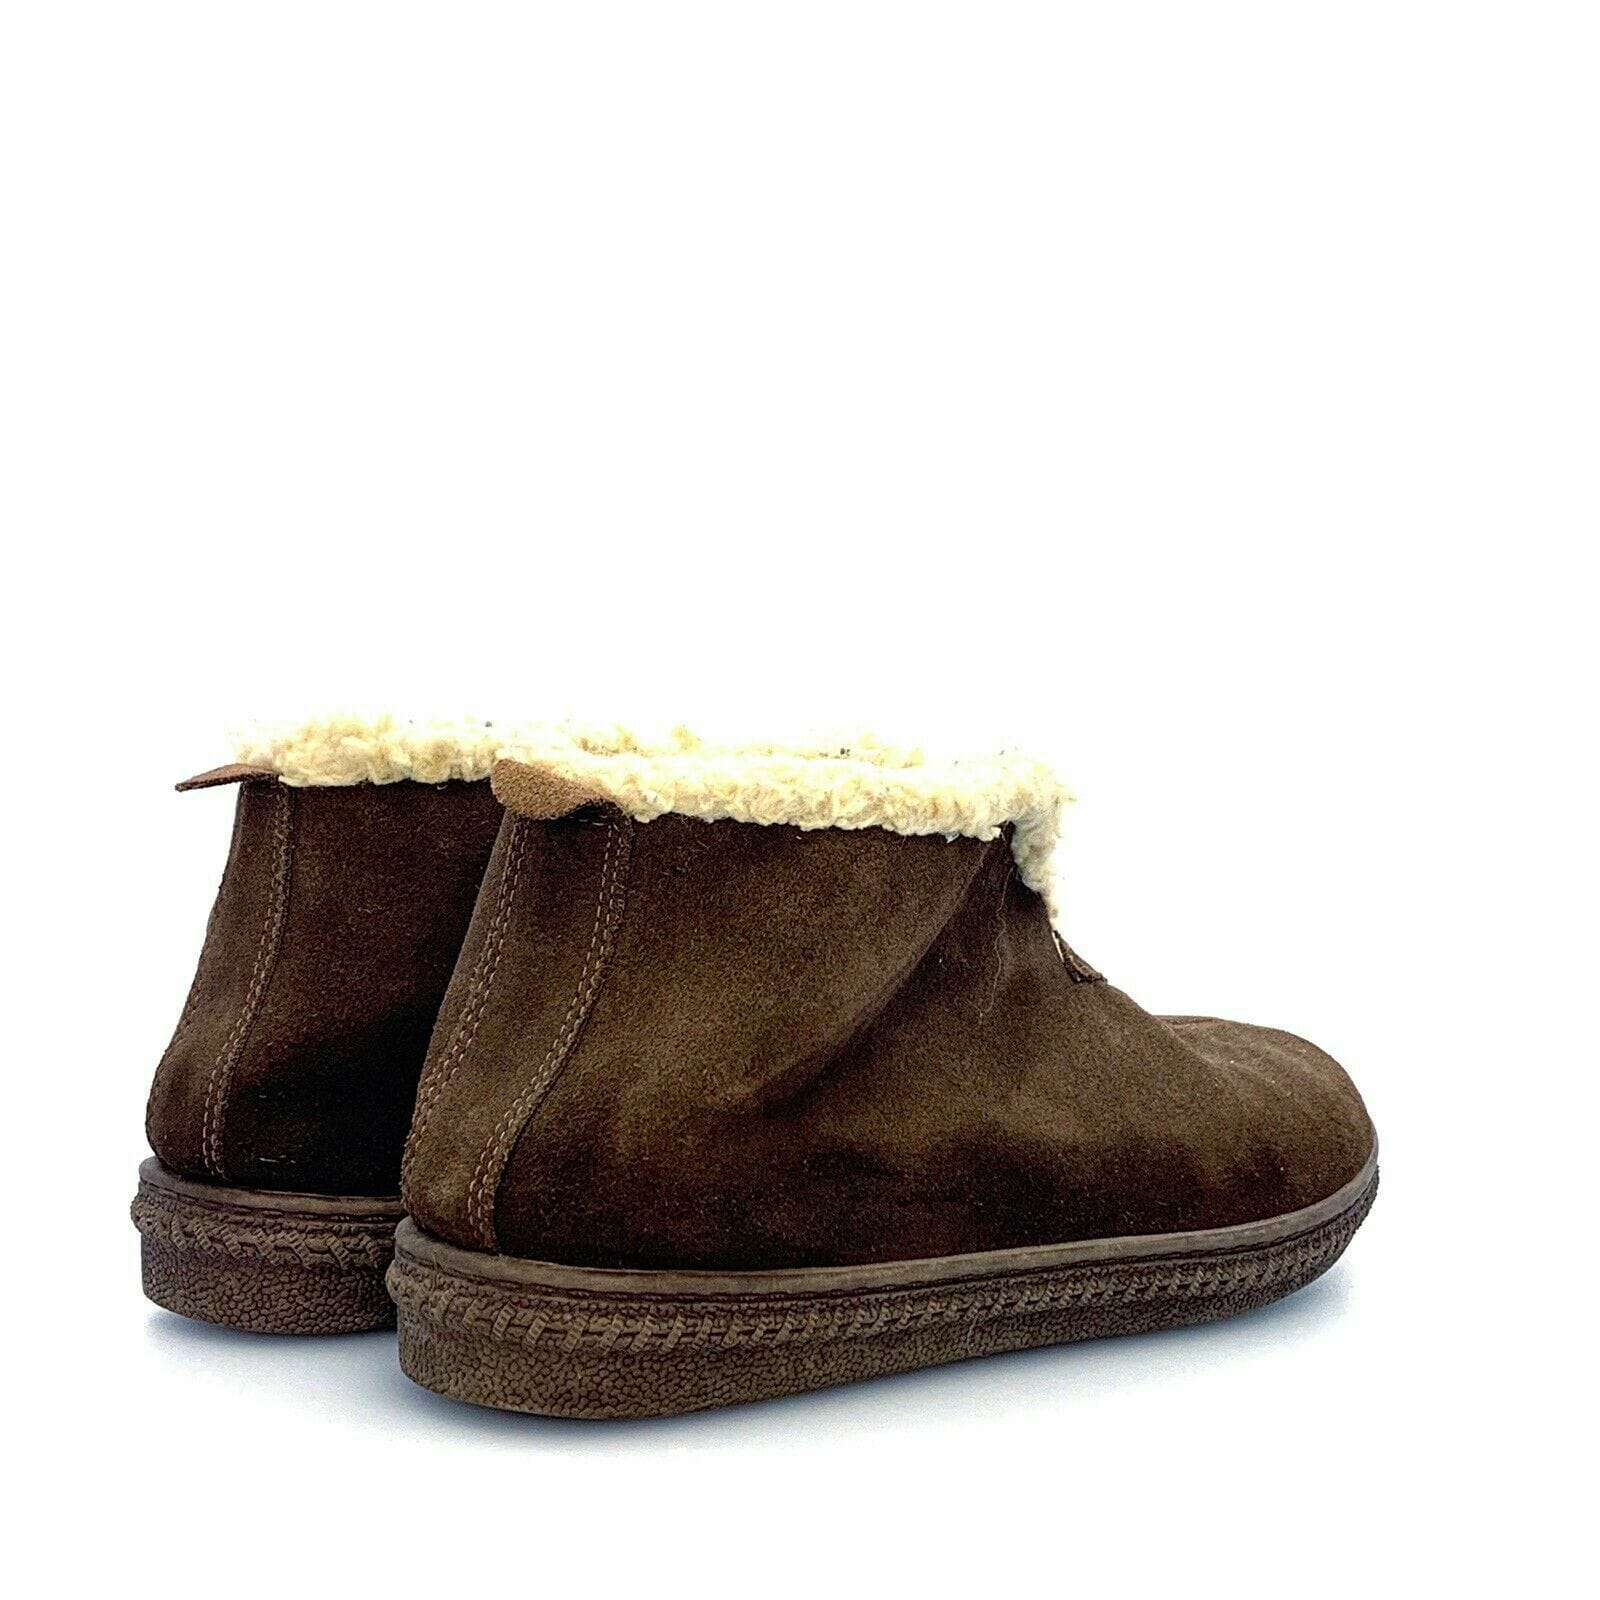 Footwarmers by Laguna Ankle Boots Lined Brown Faux Fur Slip On Shoes Size 8 - parsimonyshoppes